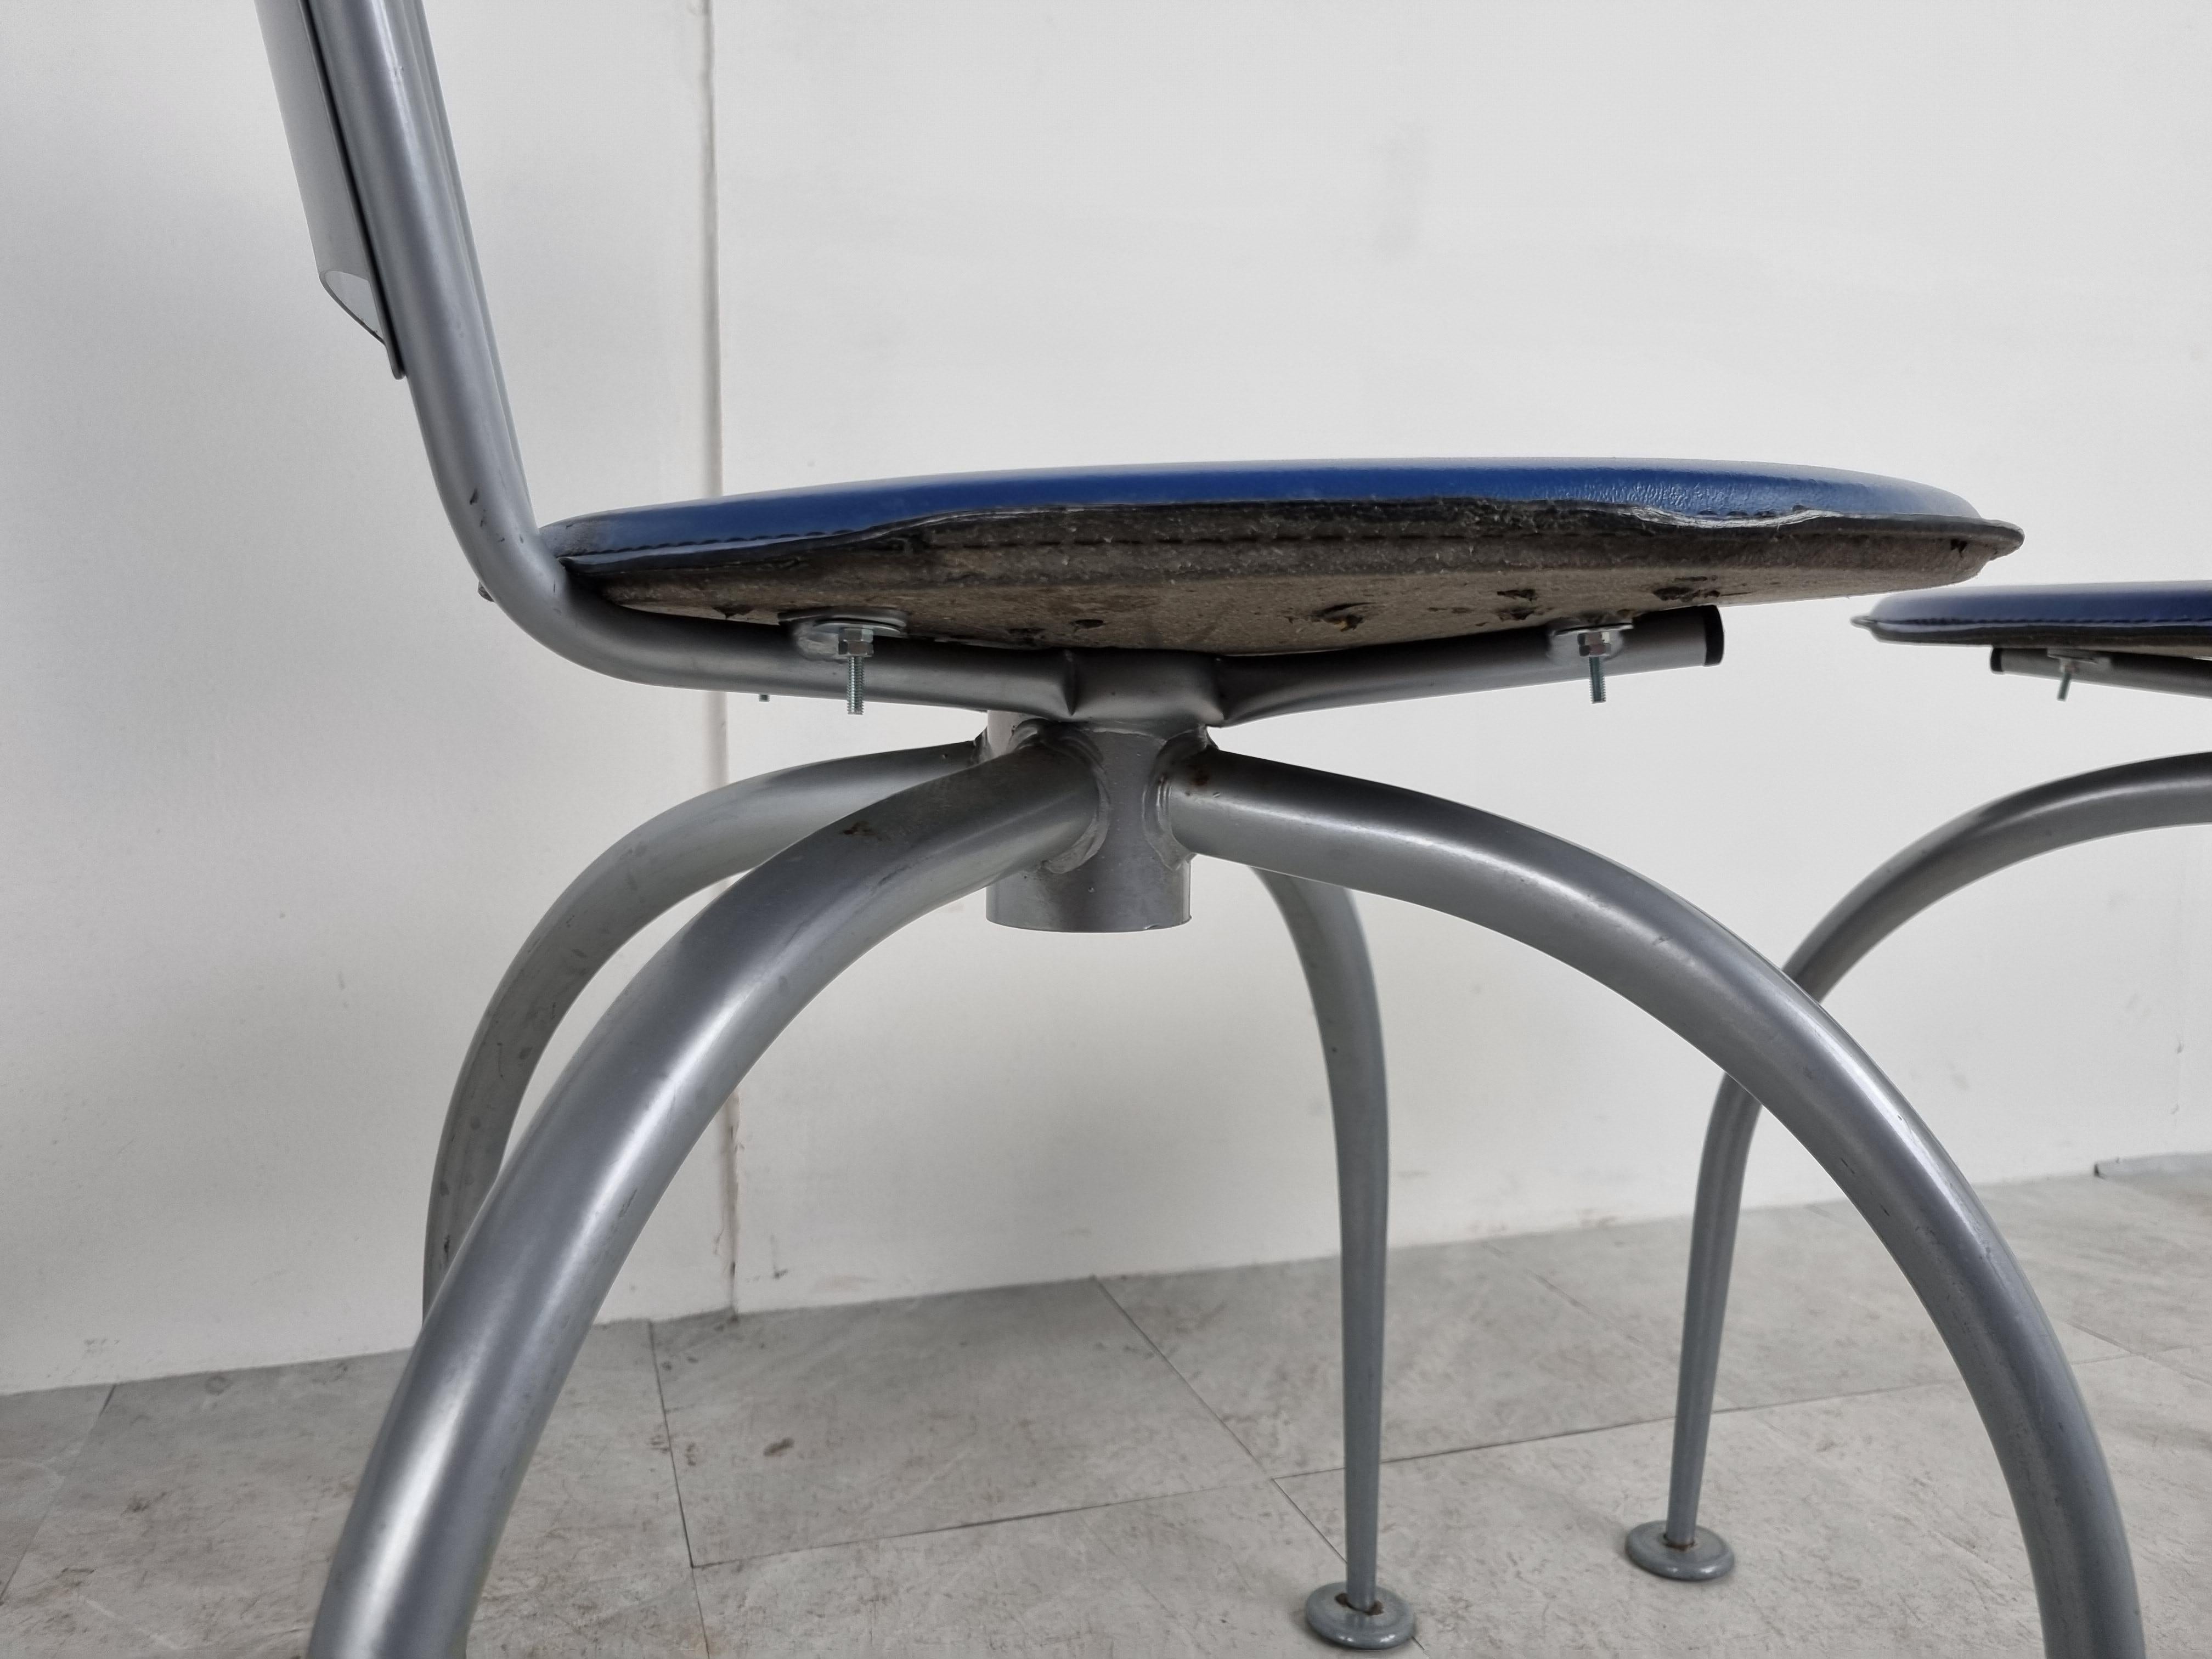 Unique design dining chairs with a nicely designed metal frame and blue imitaion leather seats.

The designer is unknown but we very much like the design style which was used here.

It has some Phlippe Starck vibes about it.

1990s - Probably